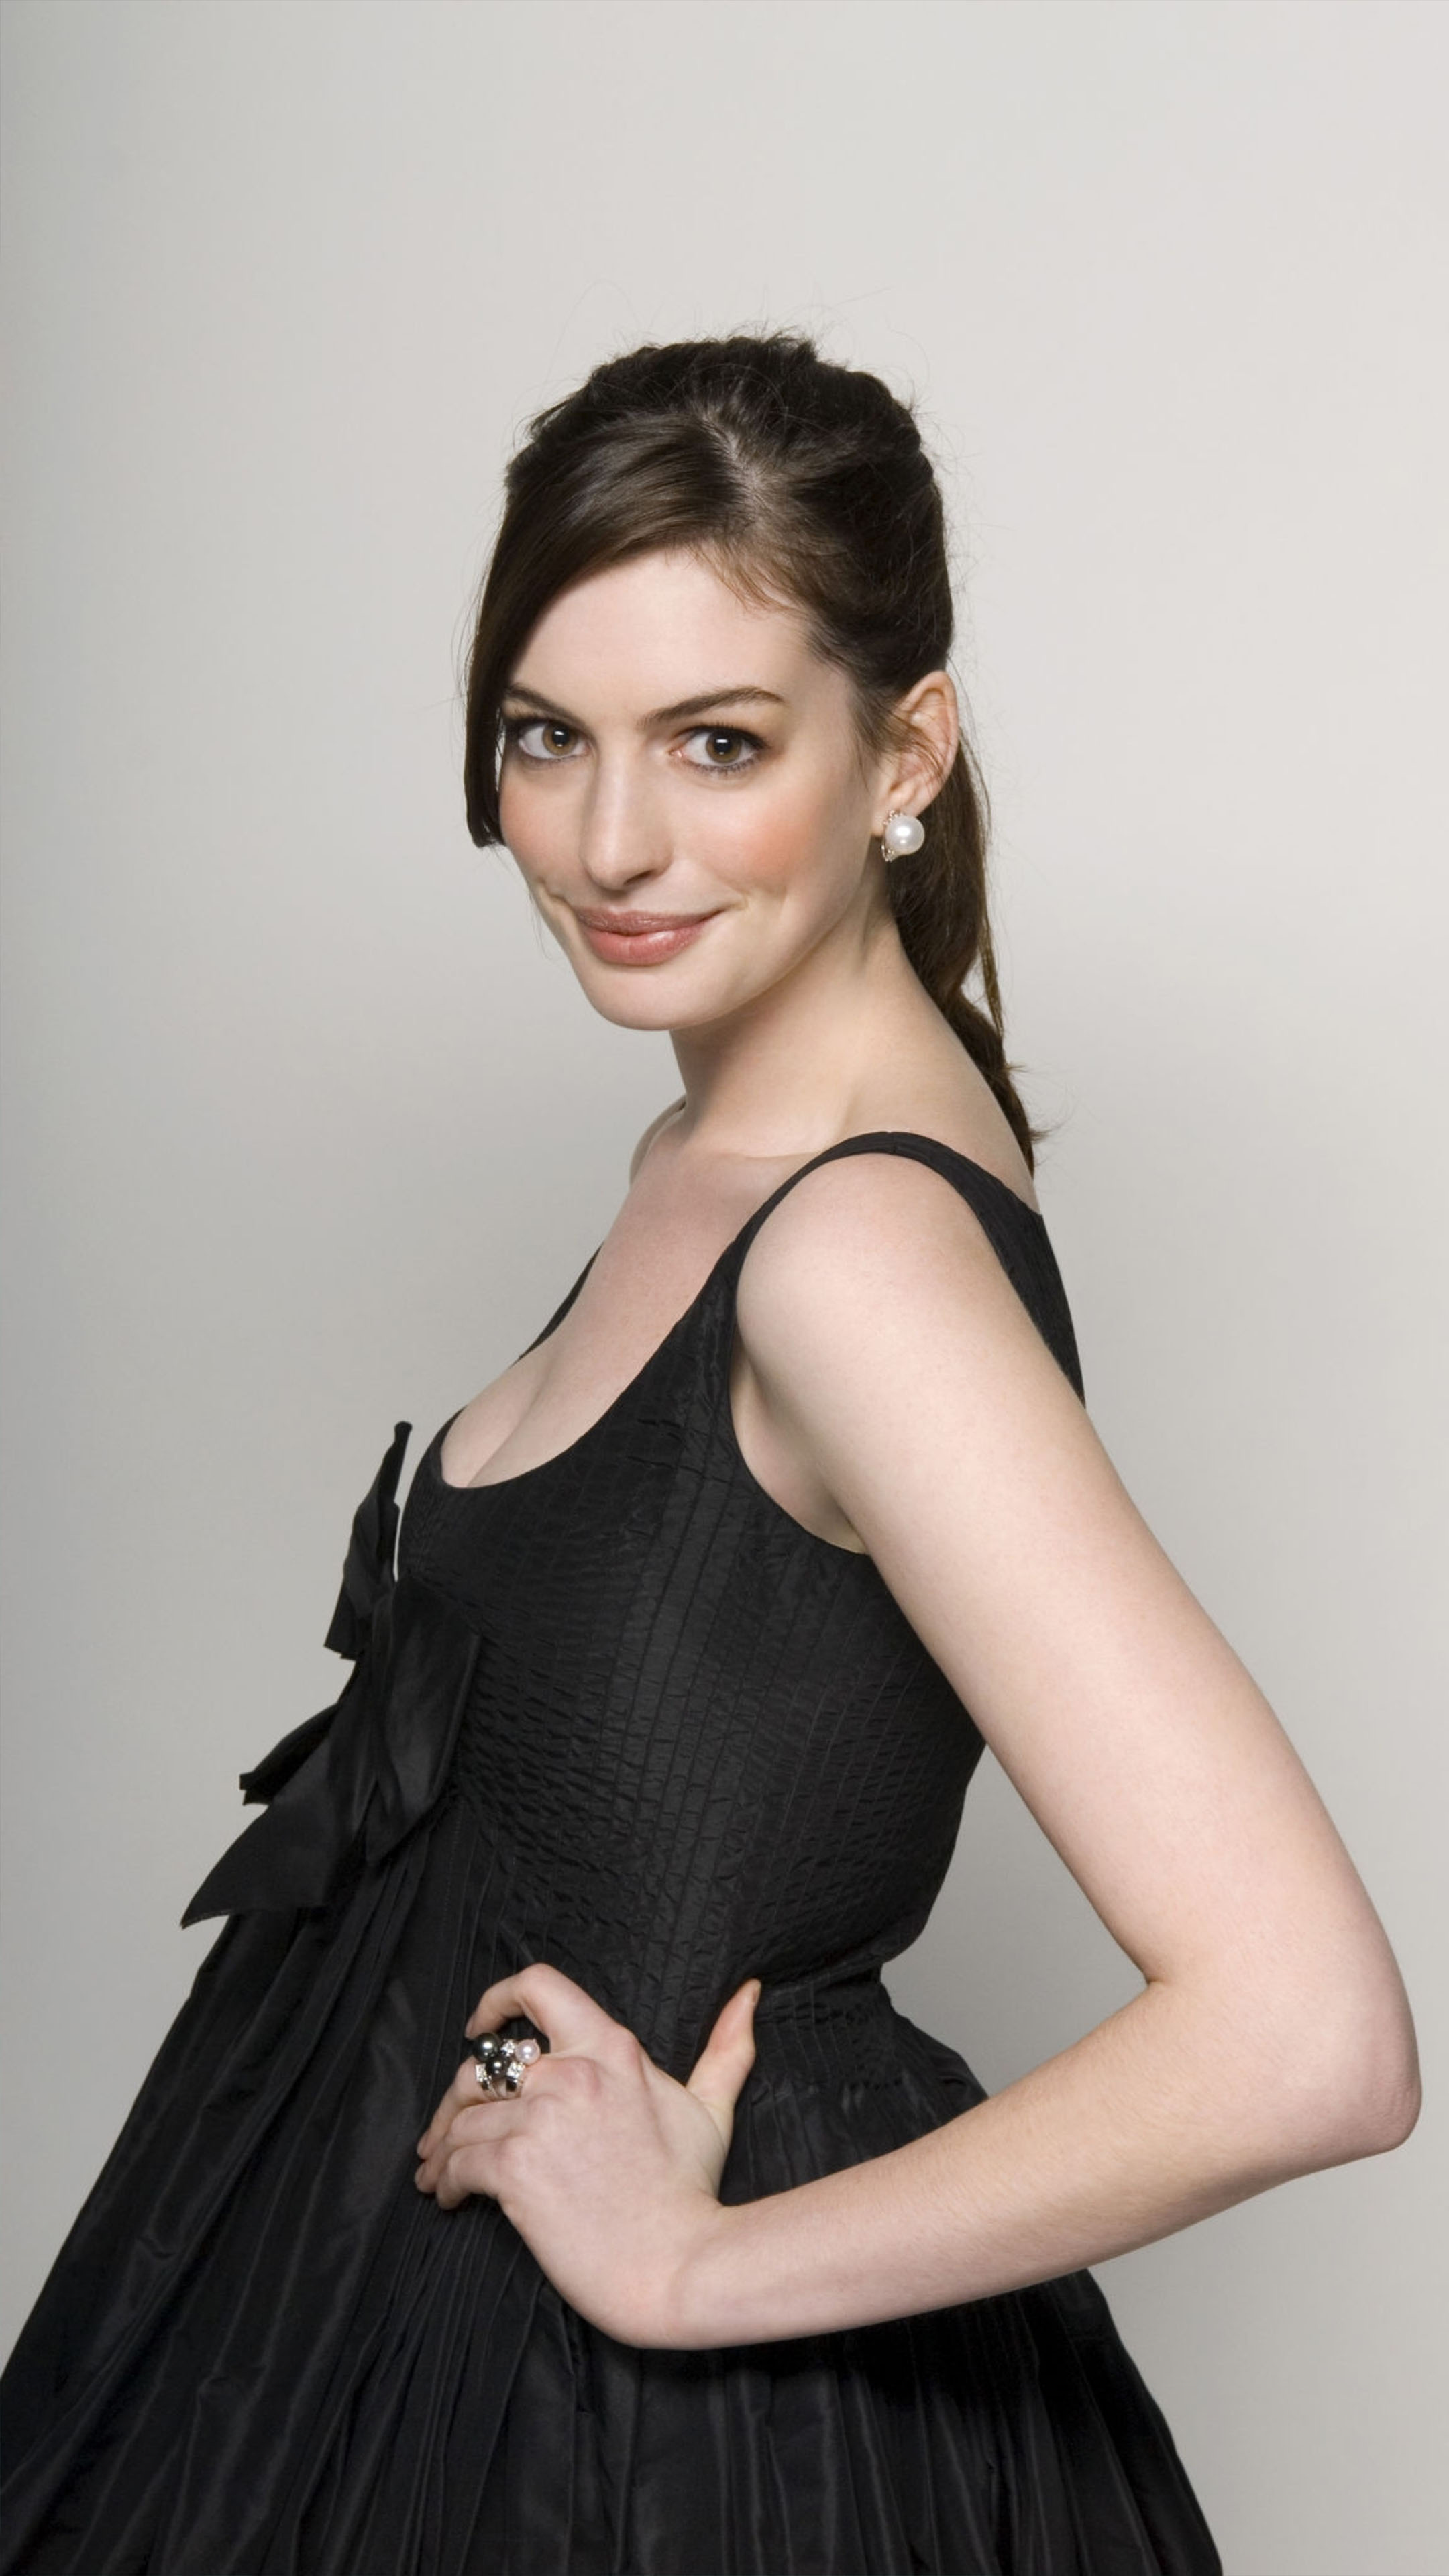 Pretty and petite actress Anne Hathaway 4K wallpaper download